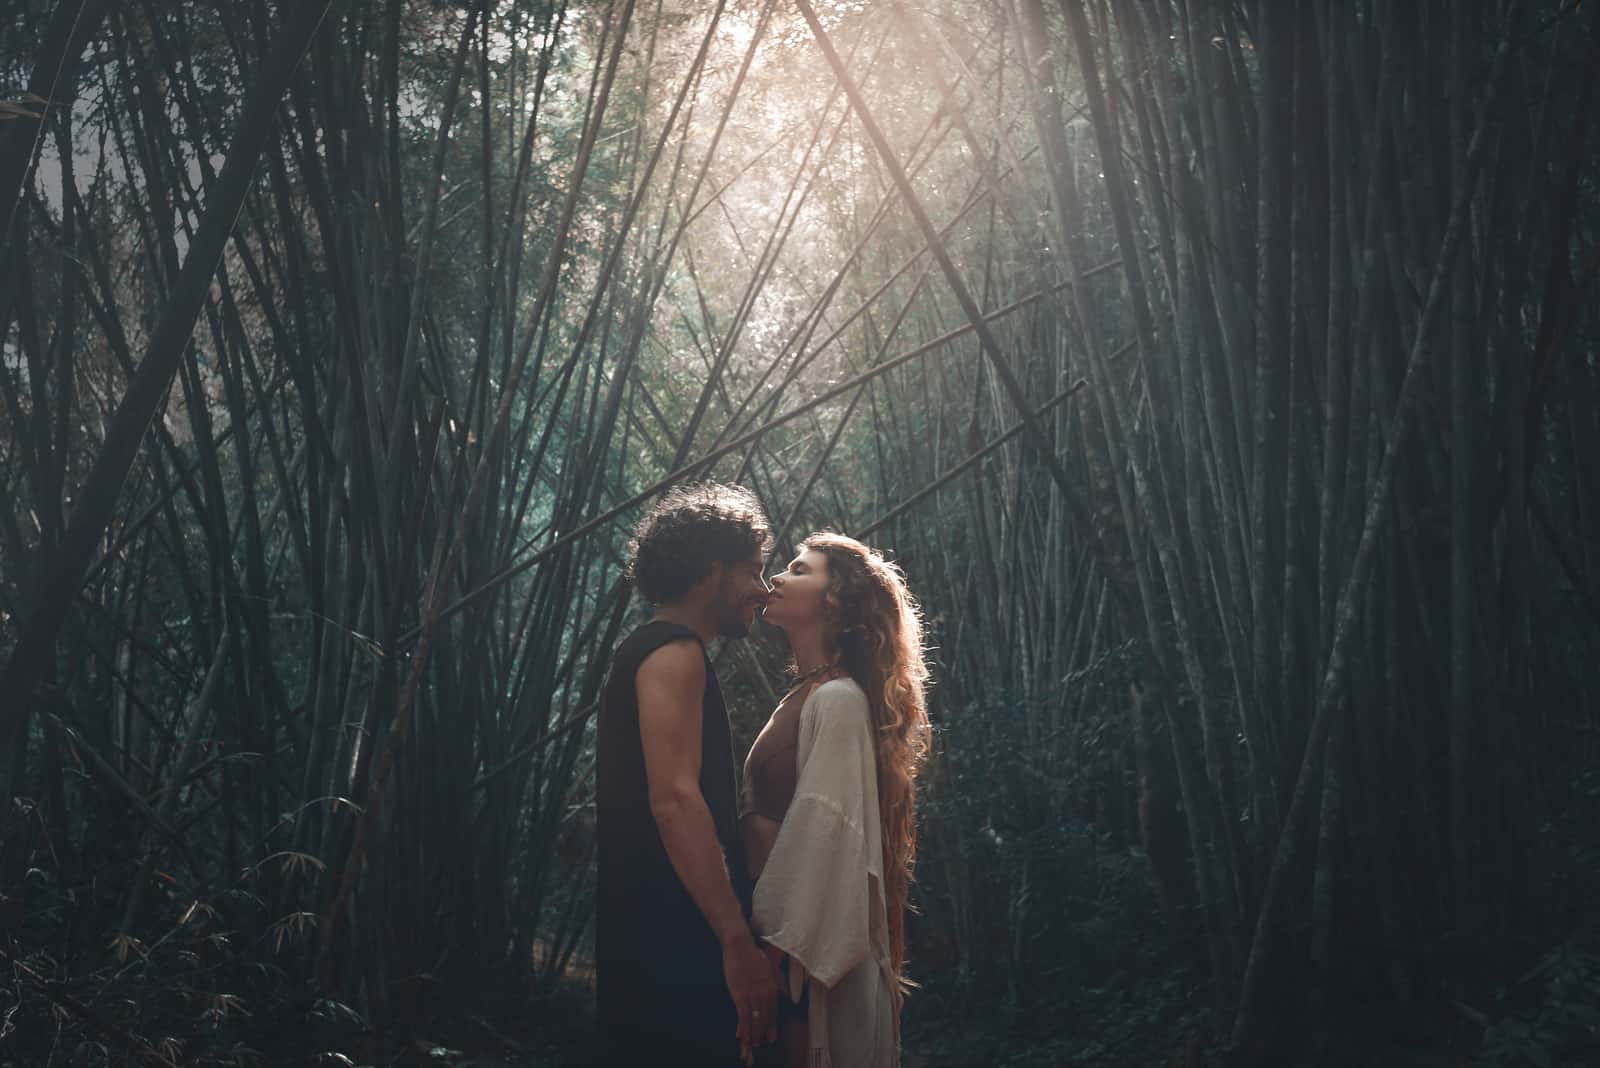 11 Signs You've Found Your Dual/twin Soul Mate